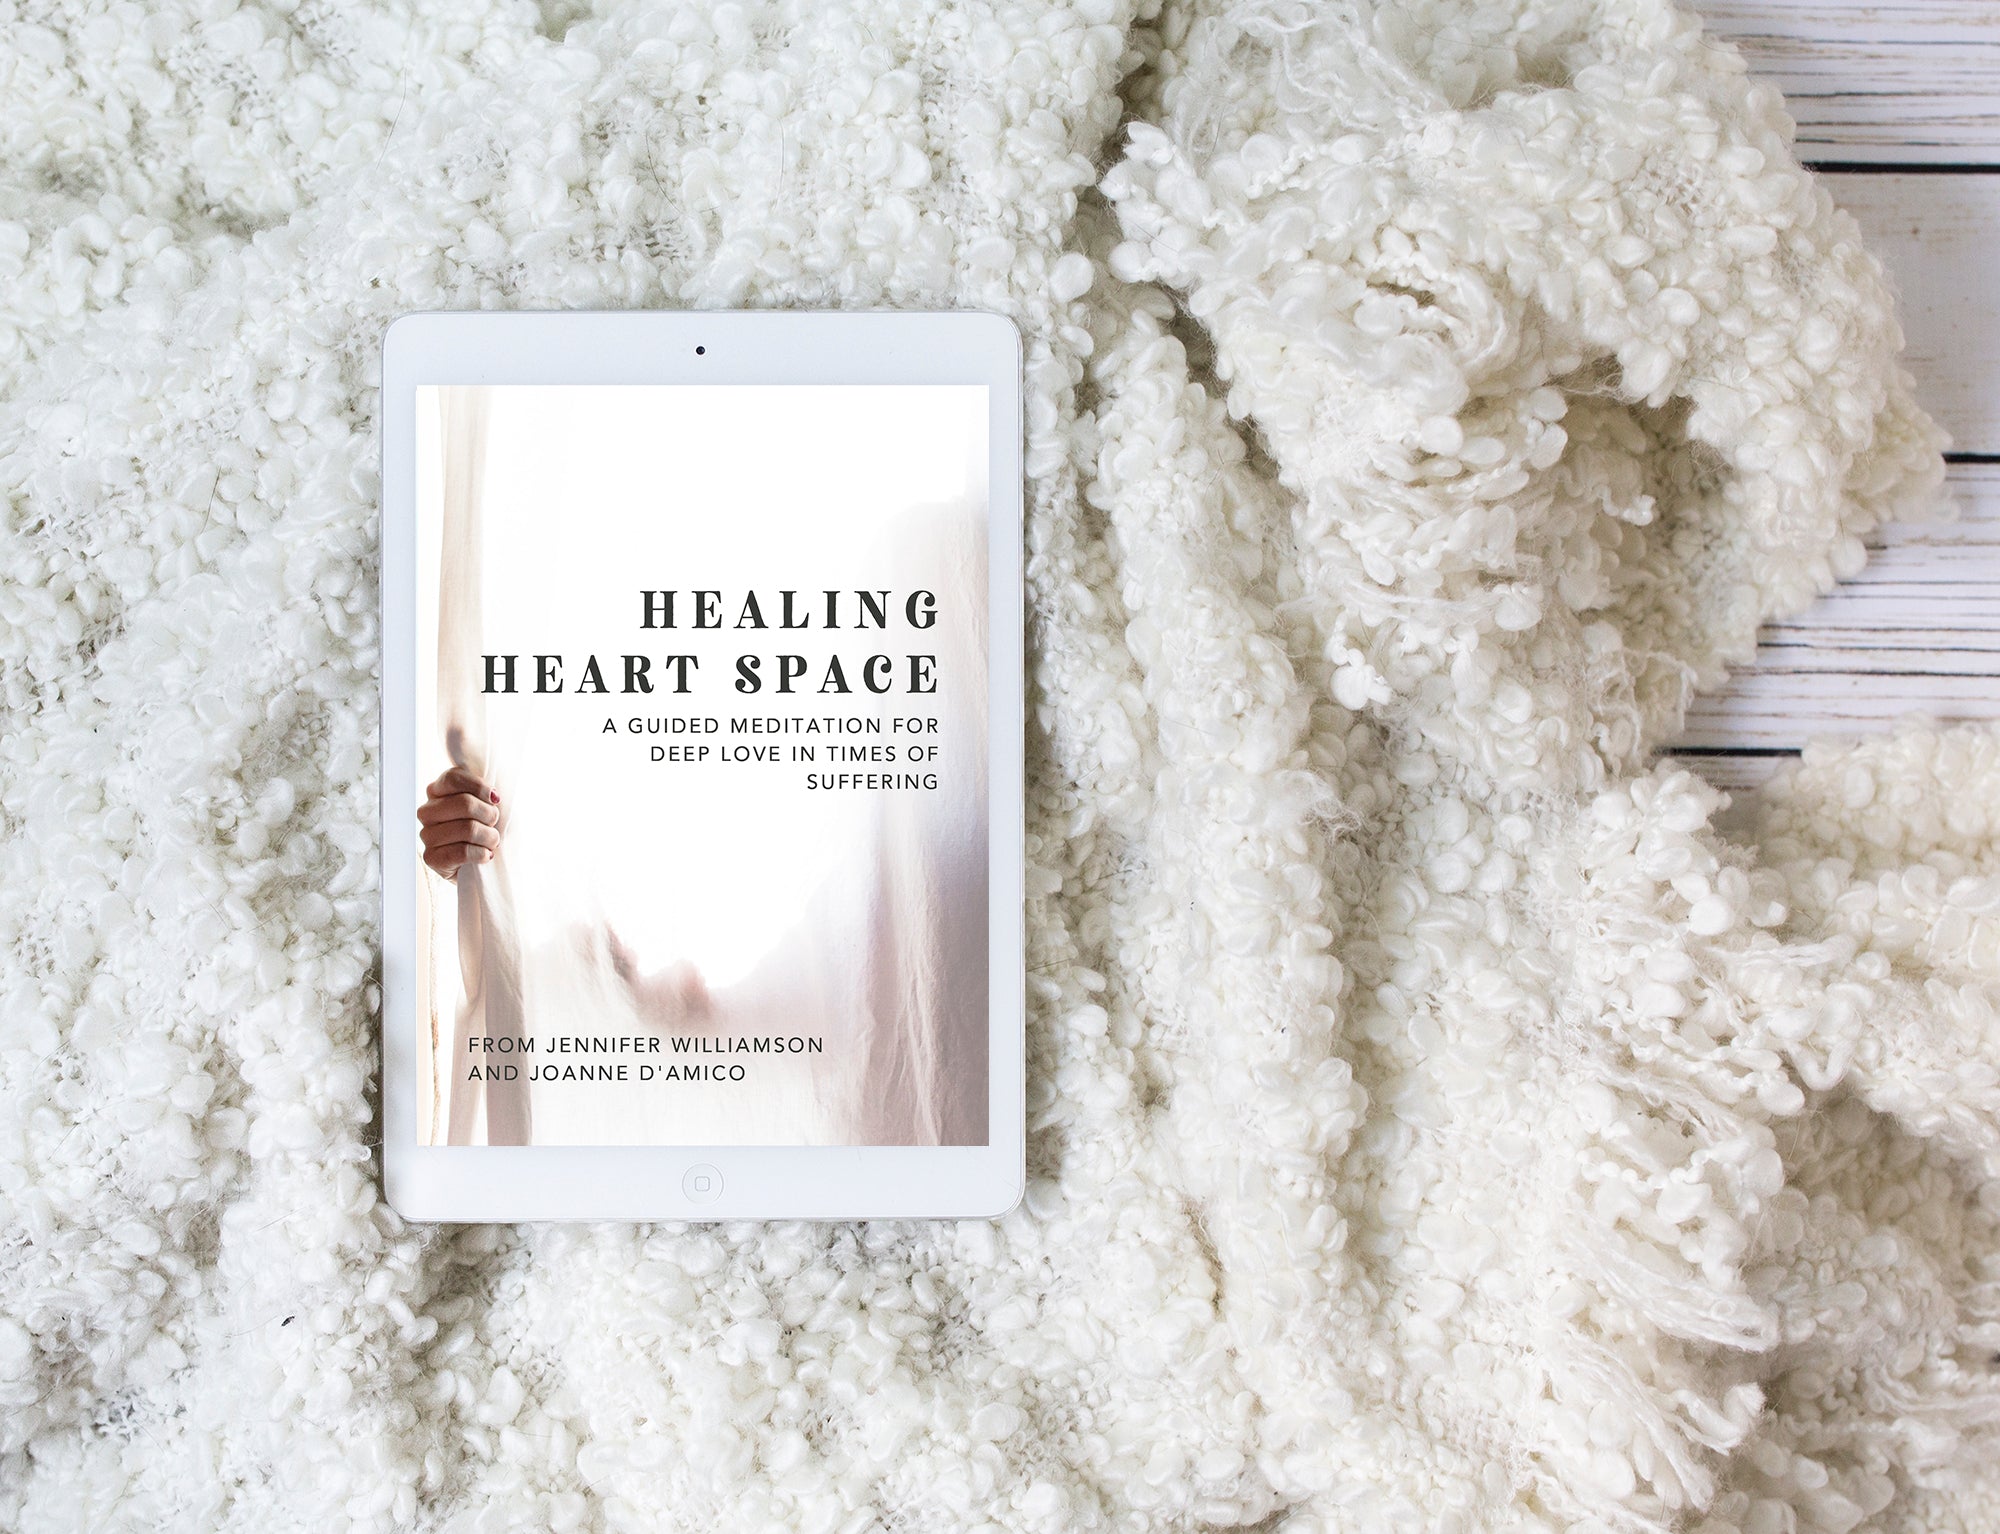 Guided Meditations for Healing, Relaxation, and Self-Care